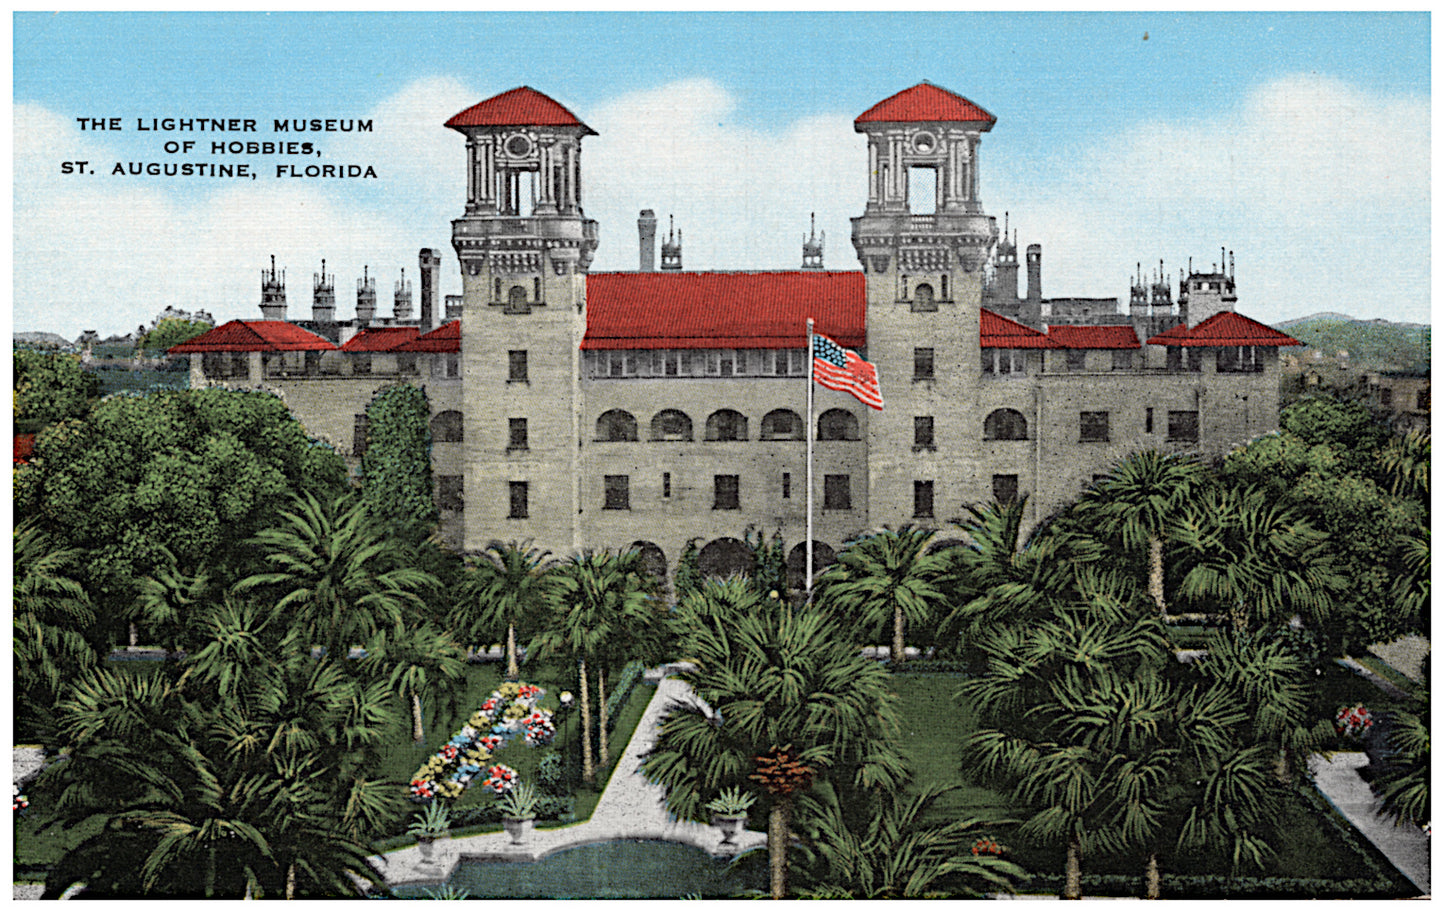 The Lightner Museum dominates the view on this old St. Augustine postcard.